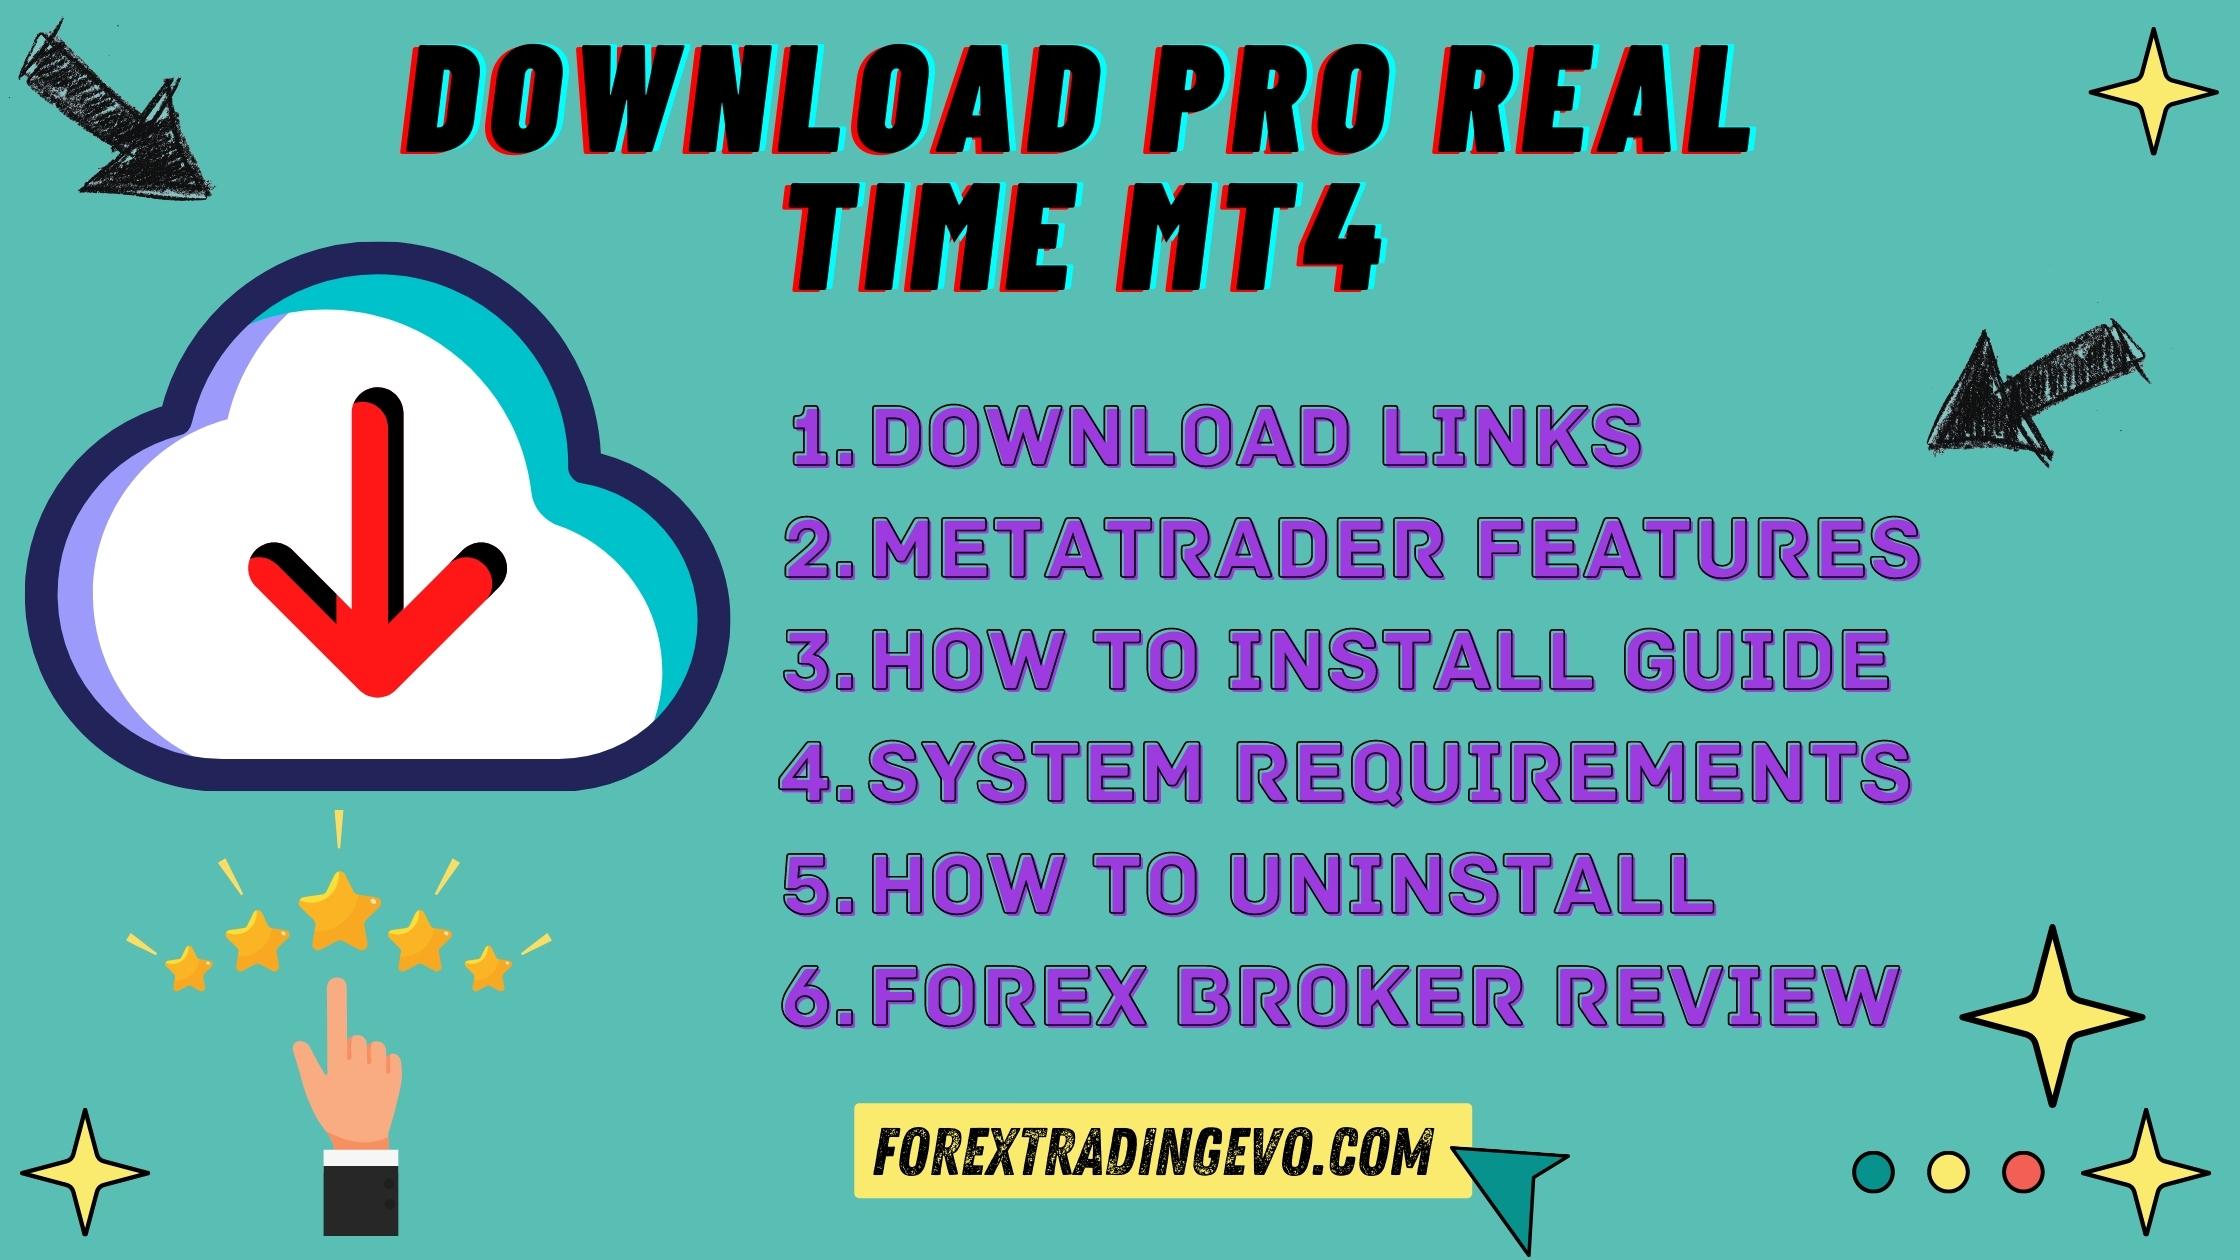 Pro Real Time Mt4